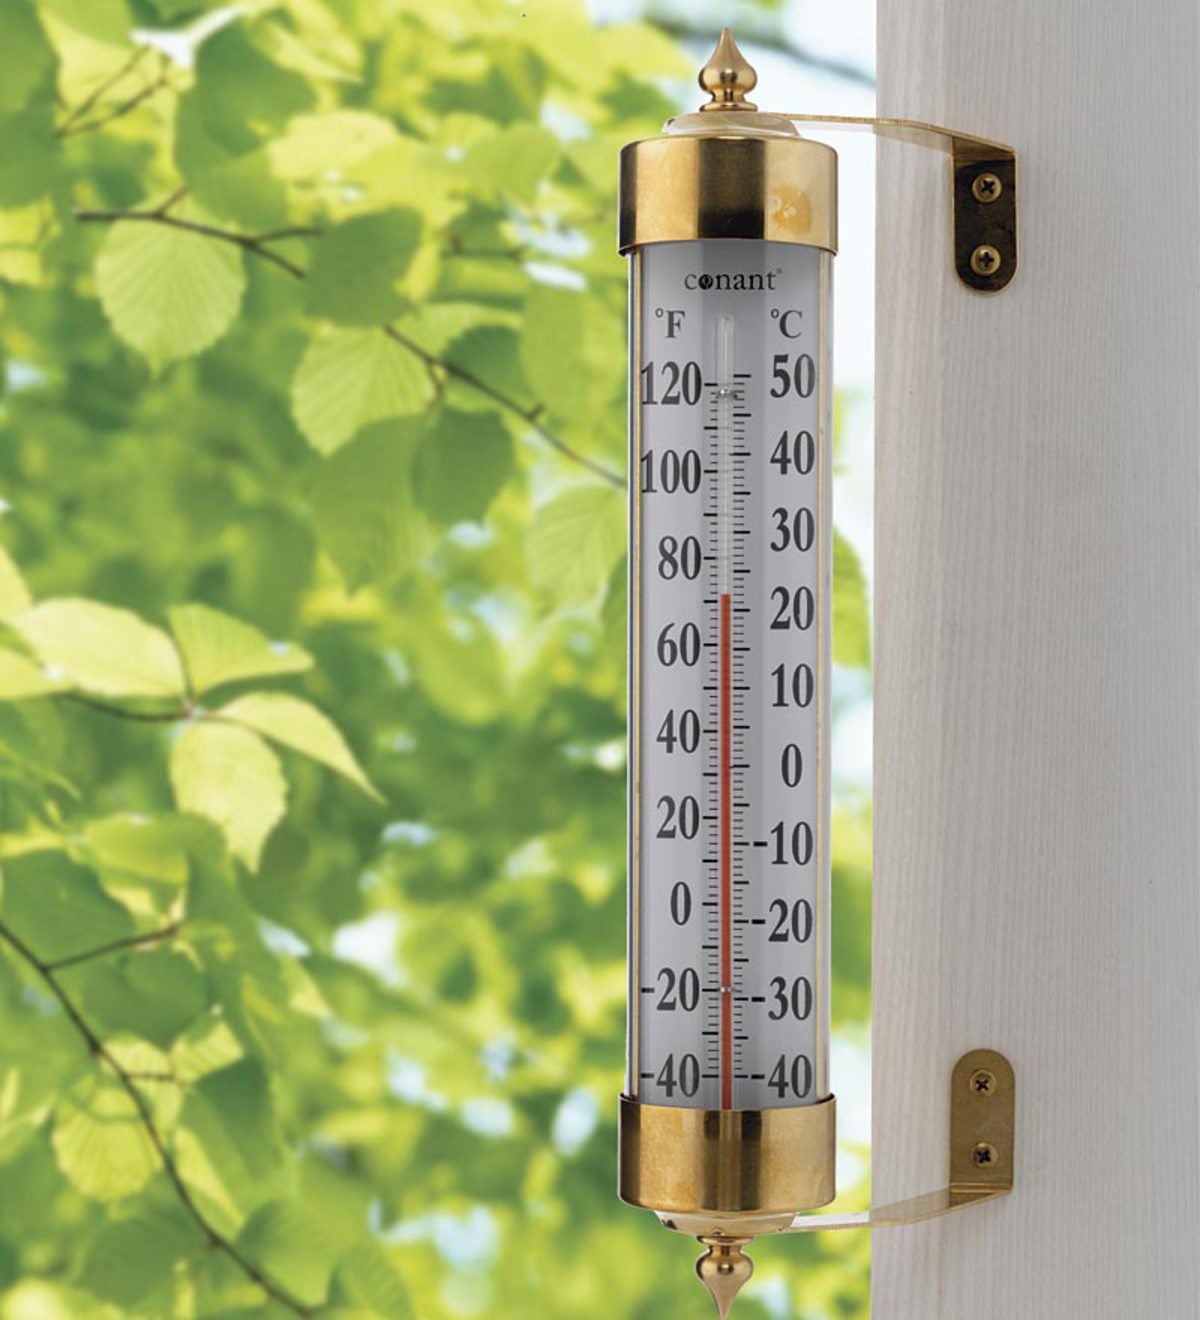 Large Swivel Brass Thermometer